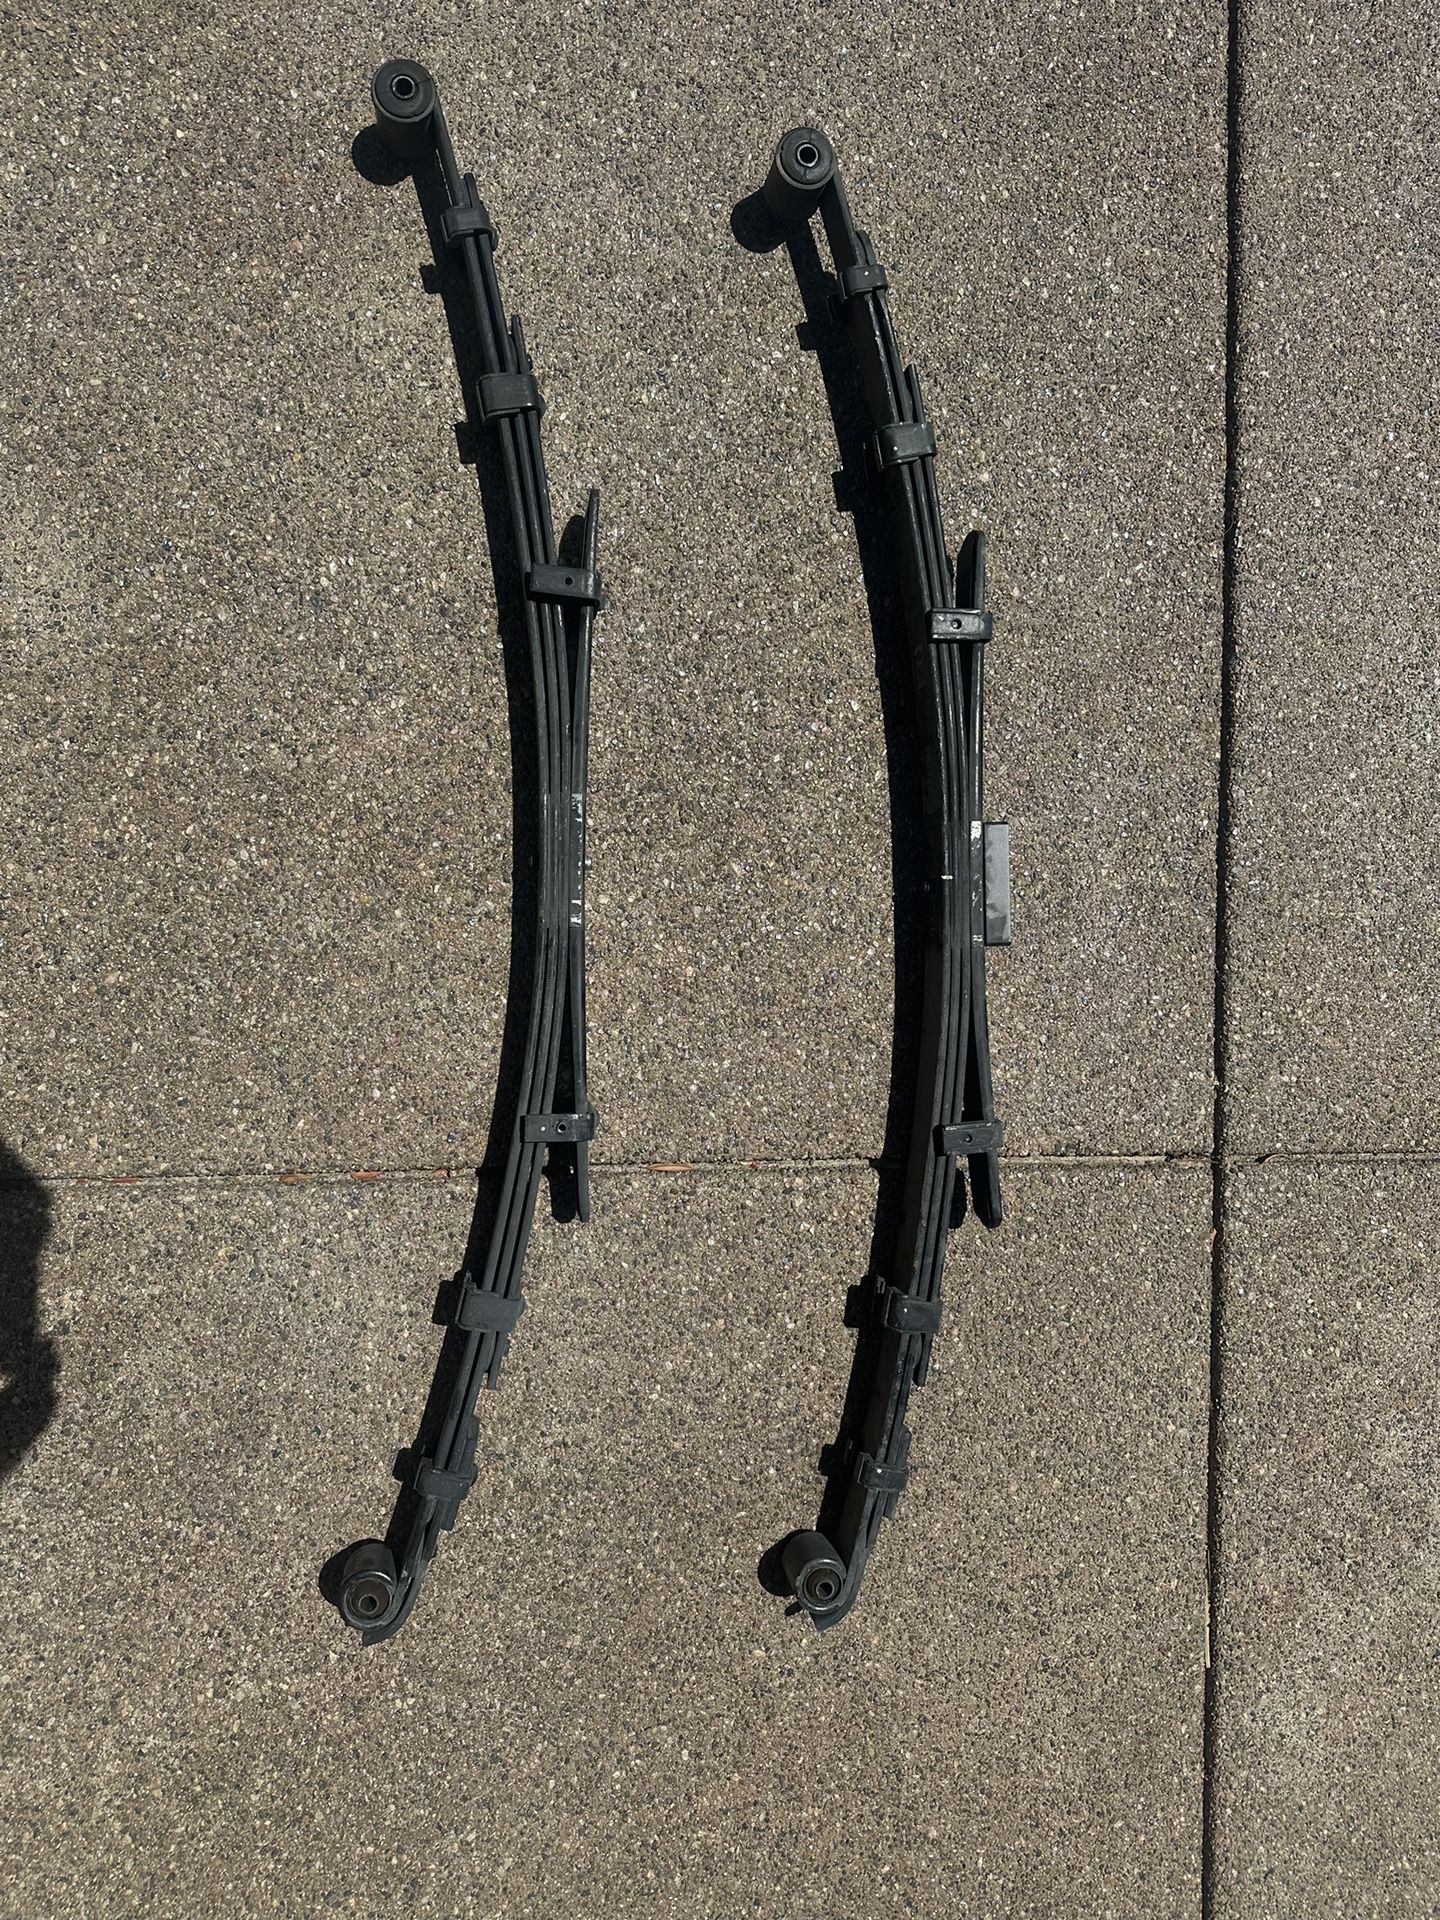 Leaf Springs From 21TRD Pro Tacoma